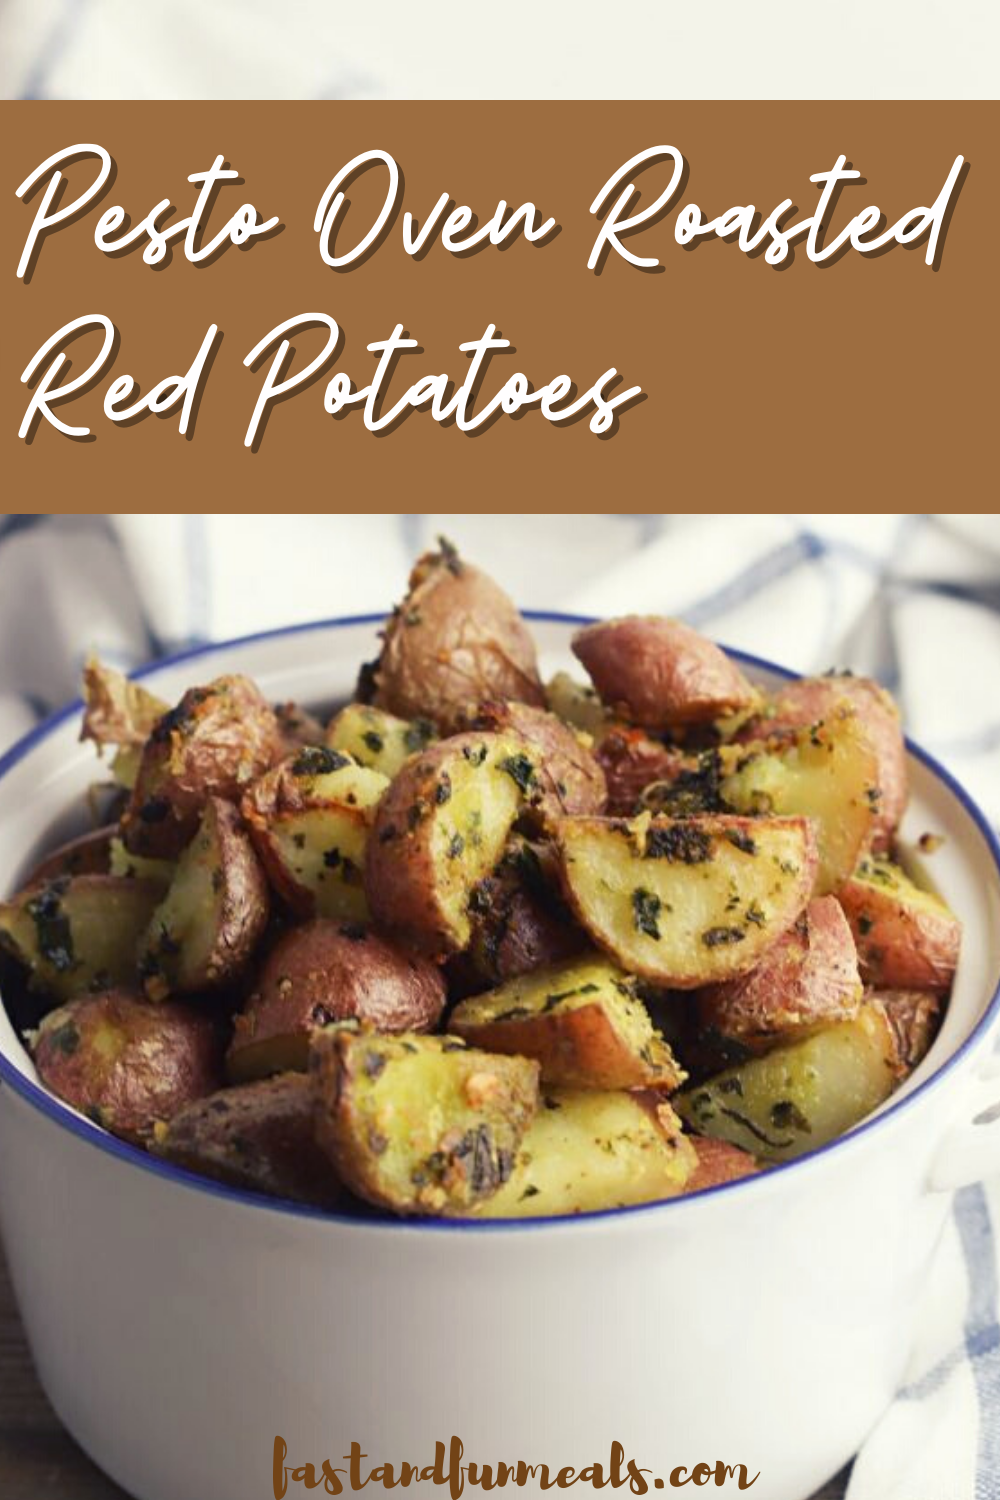 Pin showing Pesto Oven Roasted Red Potatoes